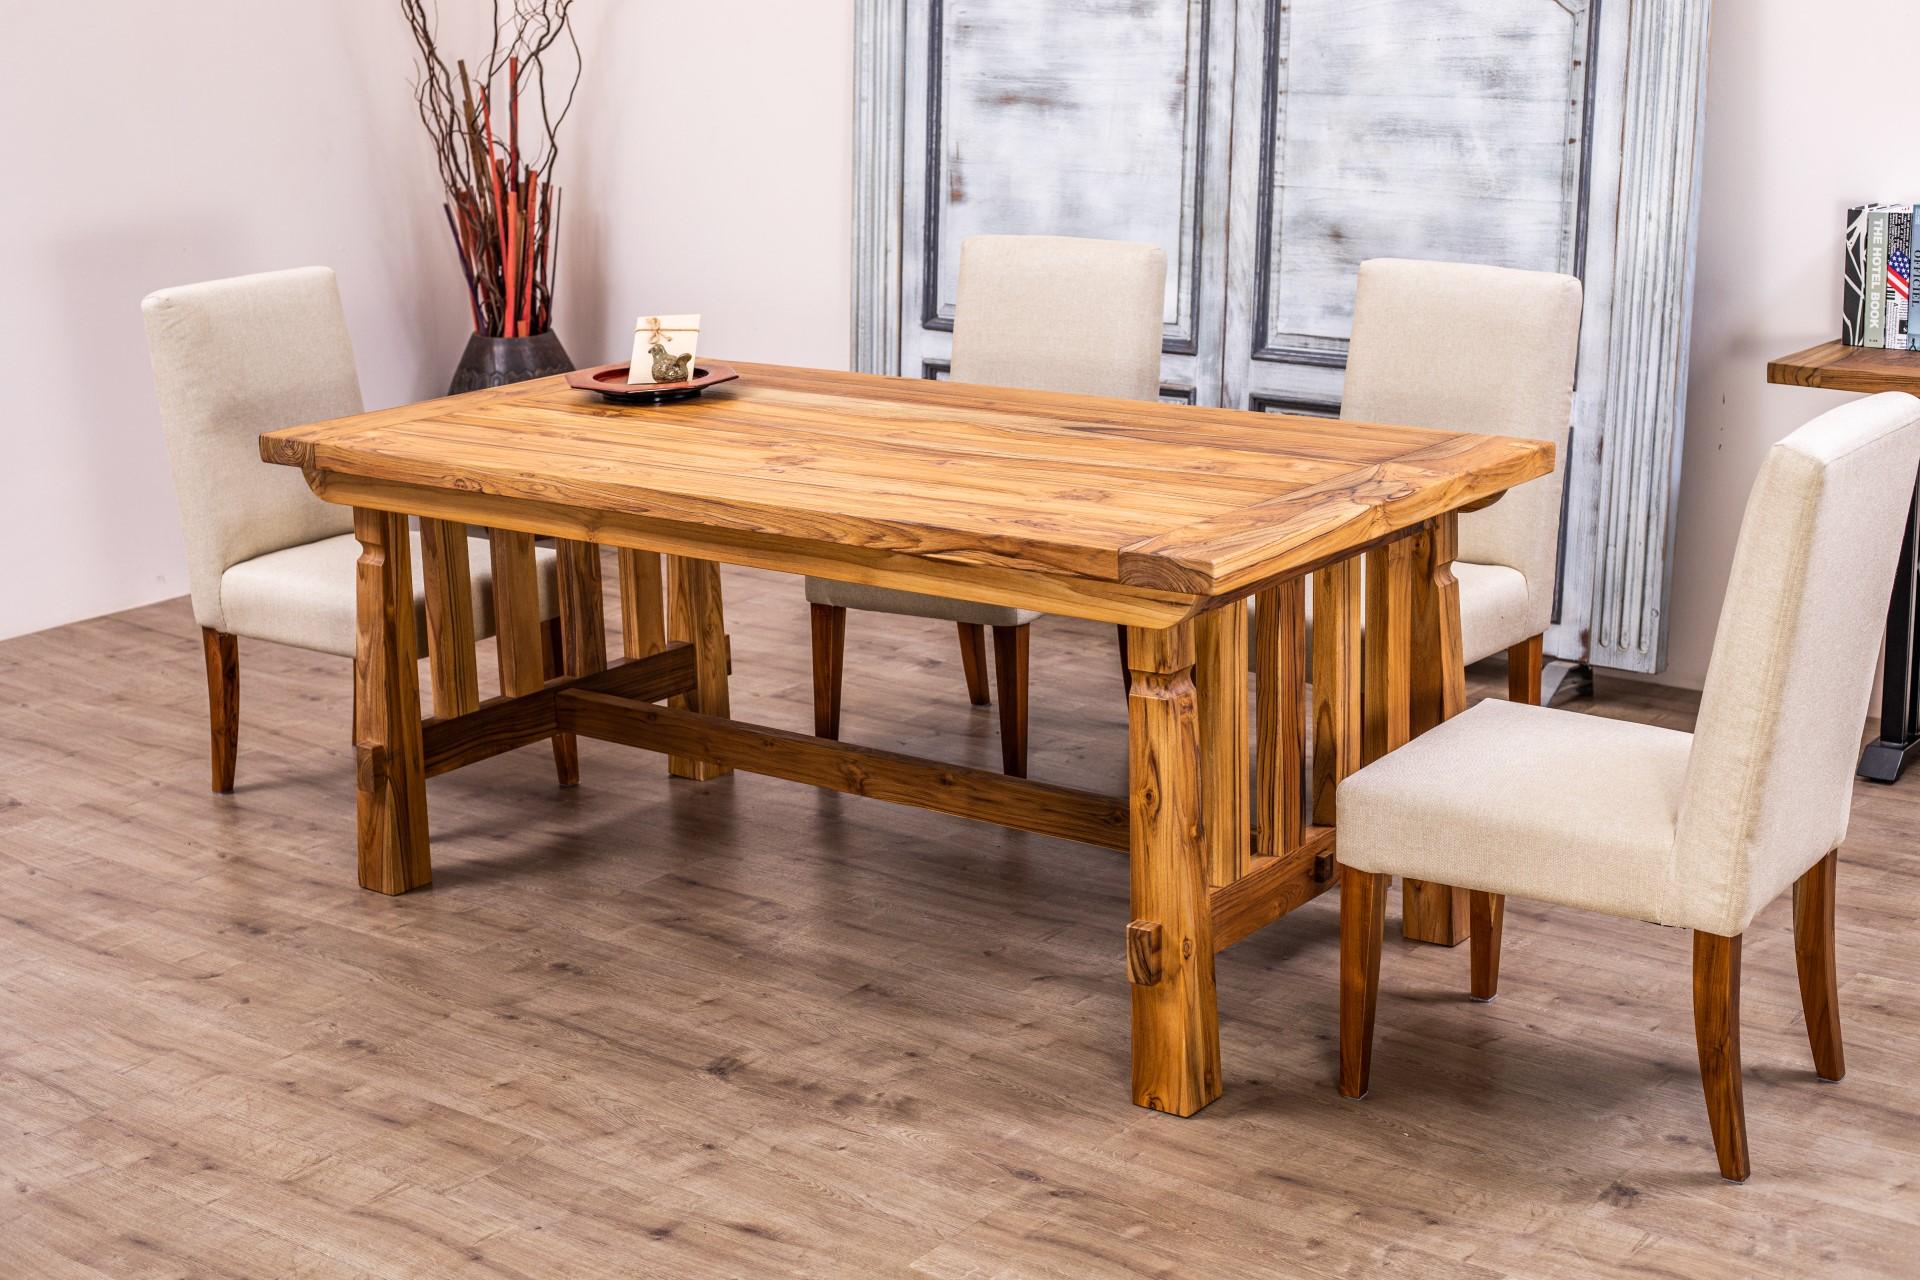 Our Sonora solid hardwood trestle table conjures a sense of old town charm. Hand-made using ancient joinery techniques, the mission-inspired base, with an arts and crafts flair, support the artisanal solid North American Oak or Golden Teak wood top.